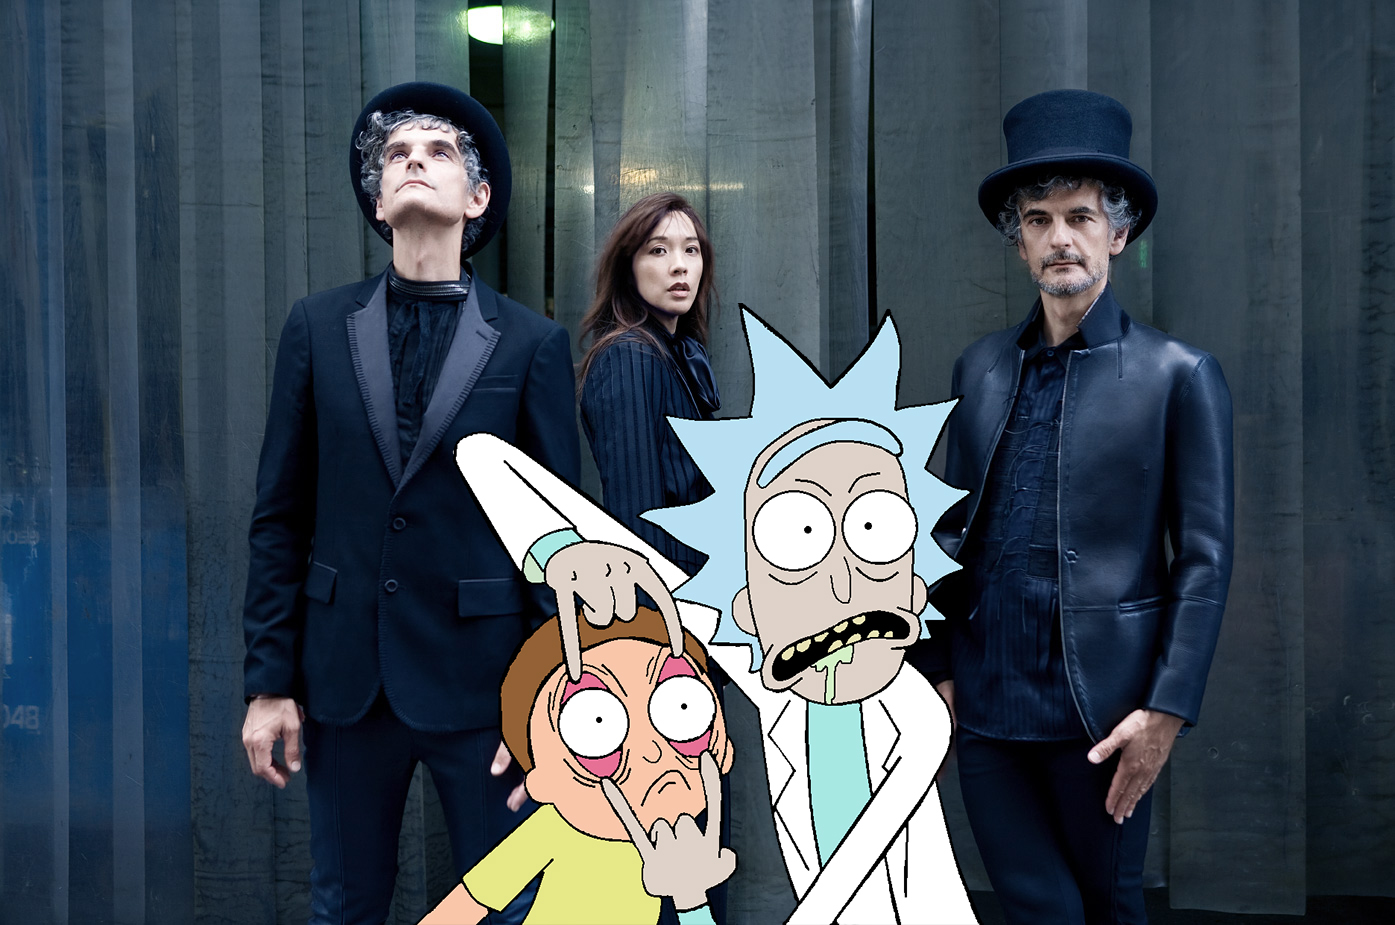 A 17-year-old Blonde Redhead song is on the Shazam chart thanks to Rick & Morty